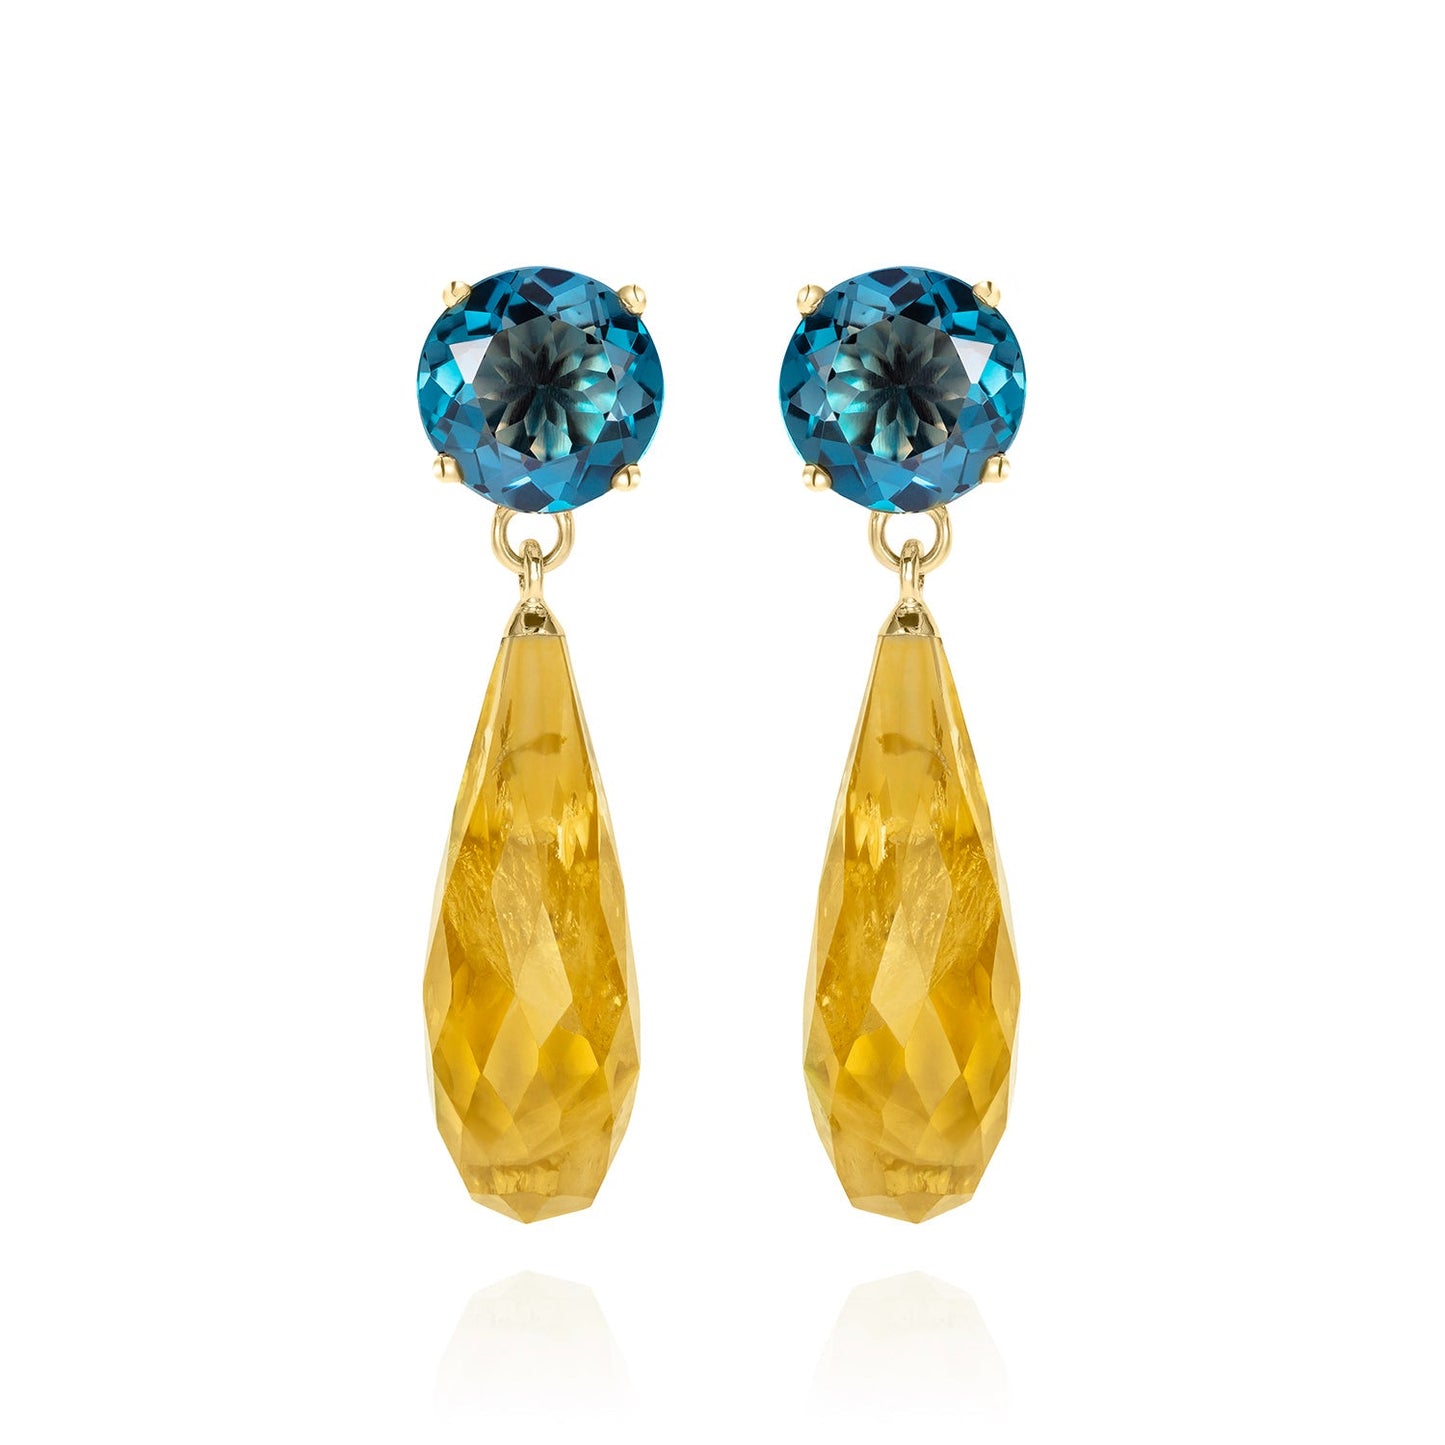 Load image into Gallery viewer, British Jewellers designed London-made custom gold jewellery -Teal Topaz and Citrine Gold Drop Earrings – Como Collection, Augustine Jewellery, British Jewellers, Gemstone Jewellery, Luxury Jewellery London.
